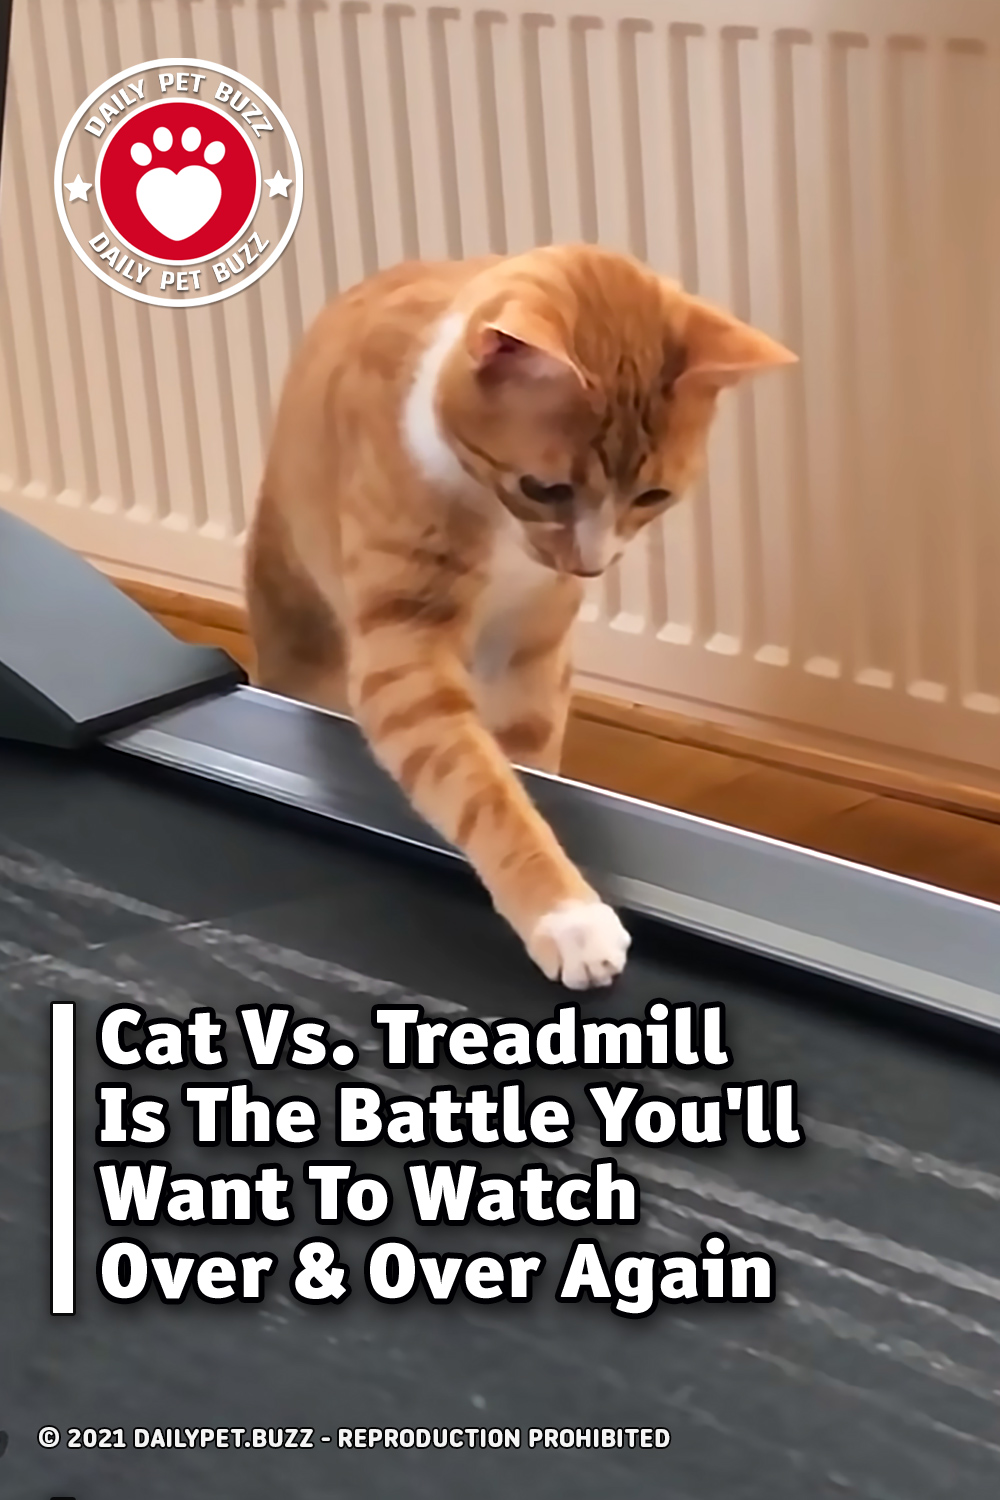 Cat Vs. Treadmill Is The Battle You\'ll Want To Watch Over & Over Again